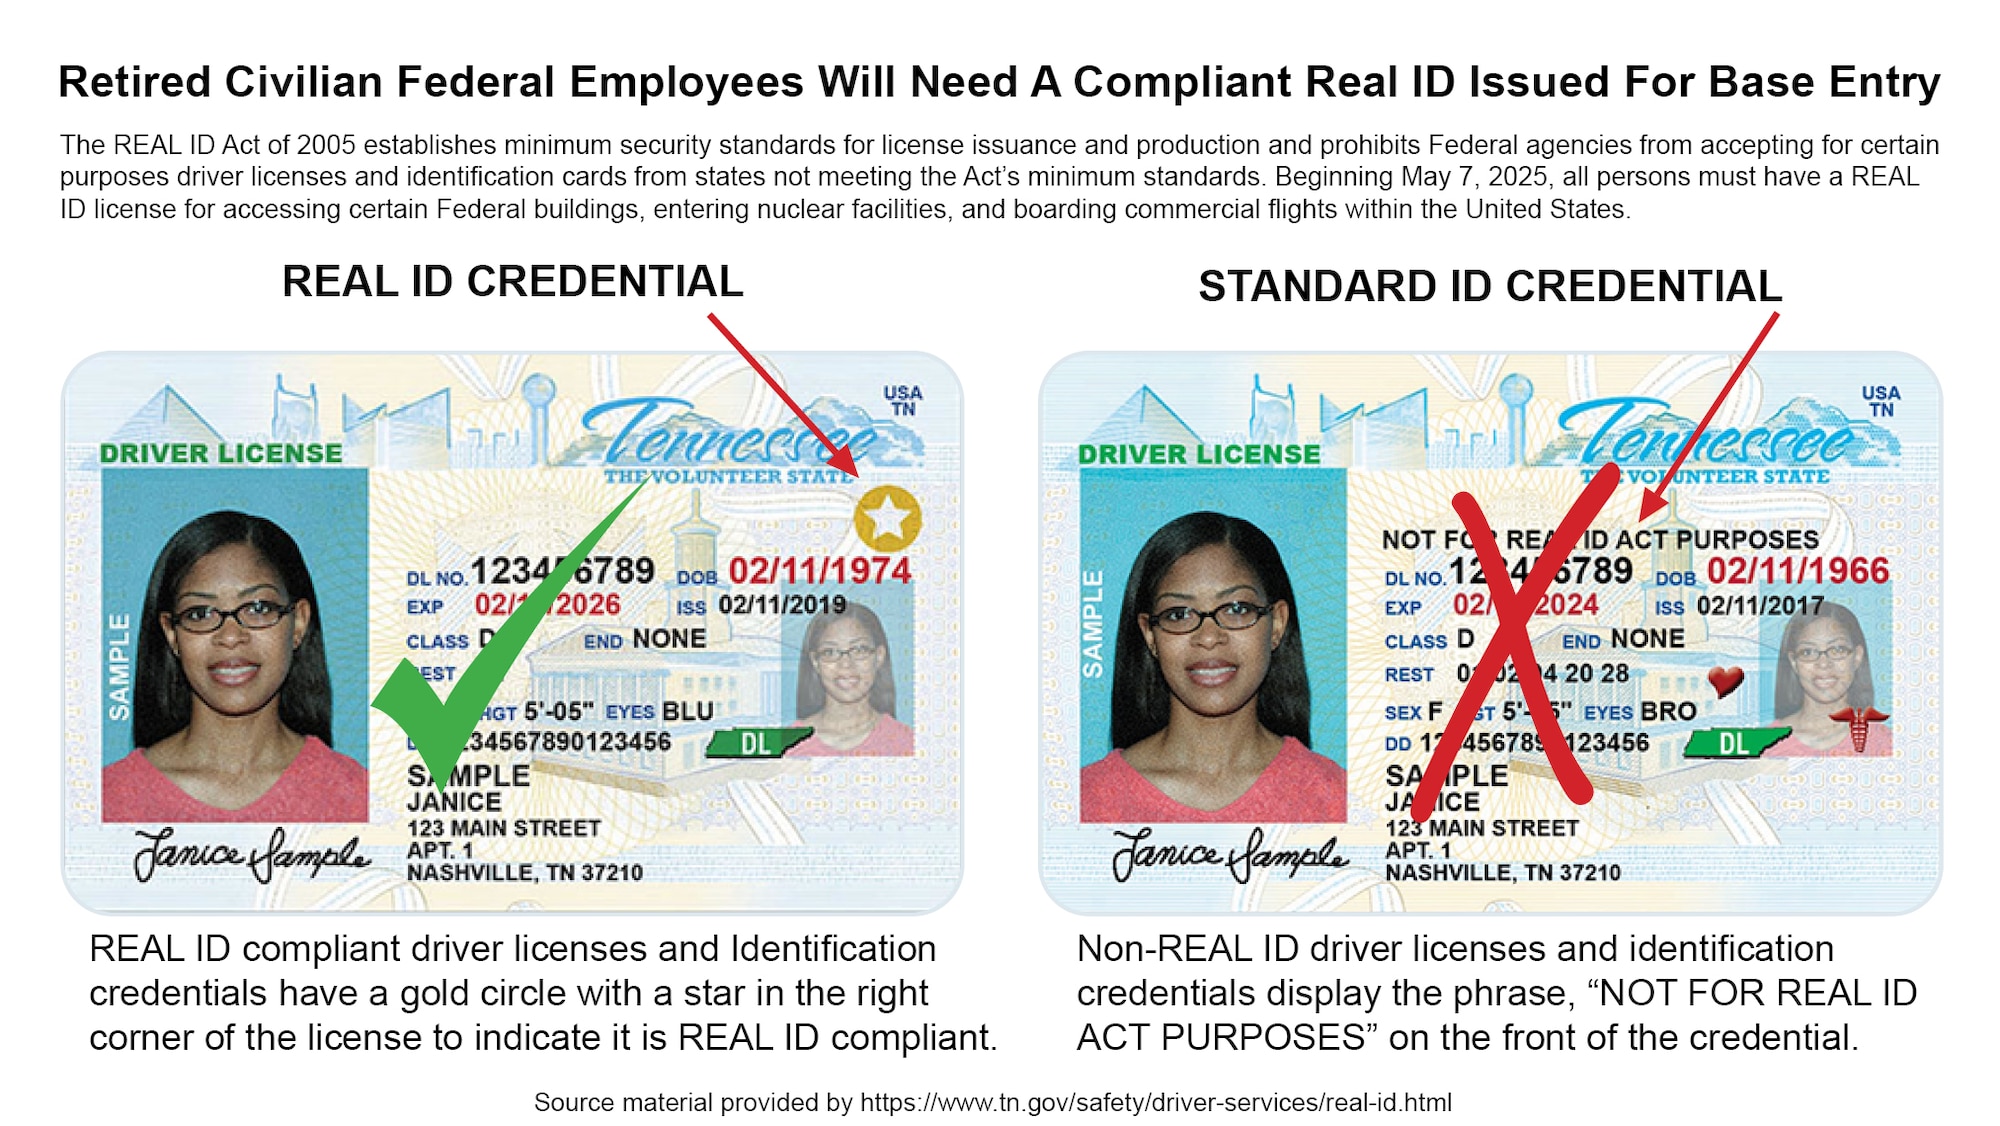 Know Before You Go - Florida Driver License or Identification Card